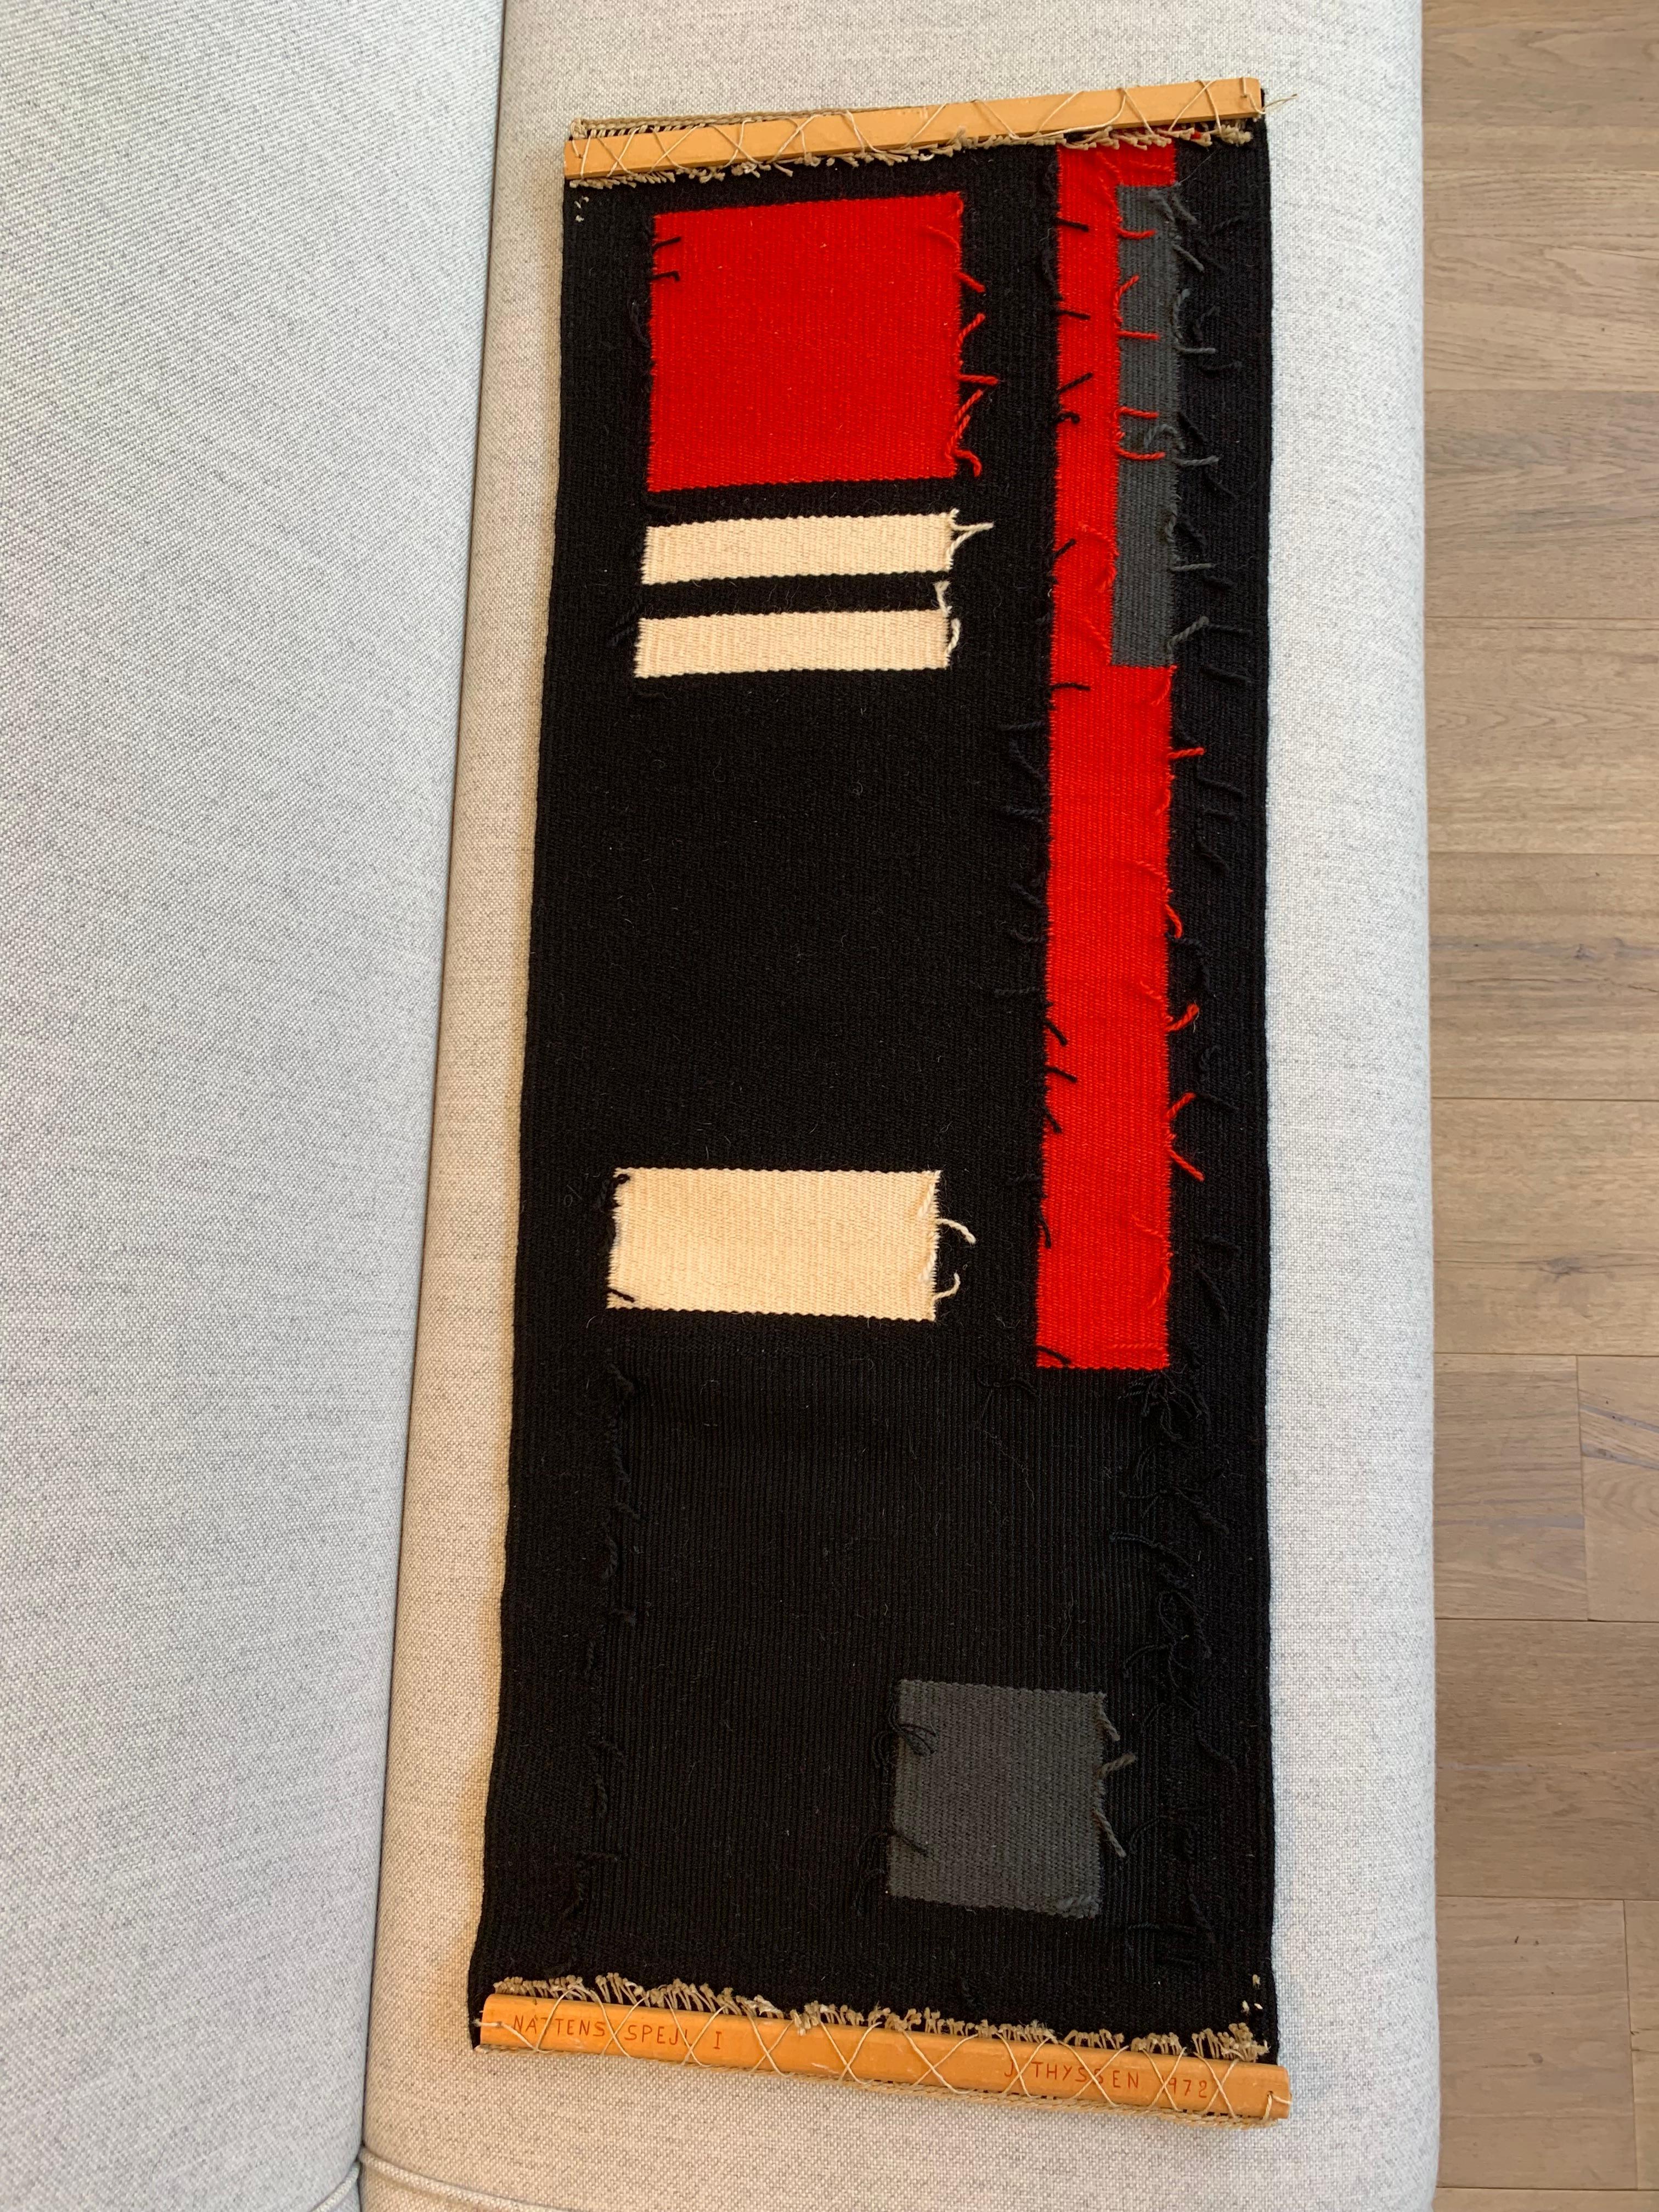 20th Century Abstract Modernist Wall Tapestry by Jette Thyssen Signed & Dated 1972, De Stijl